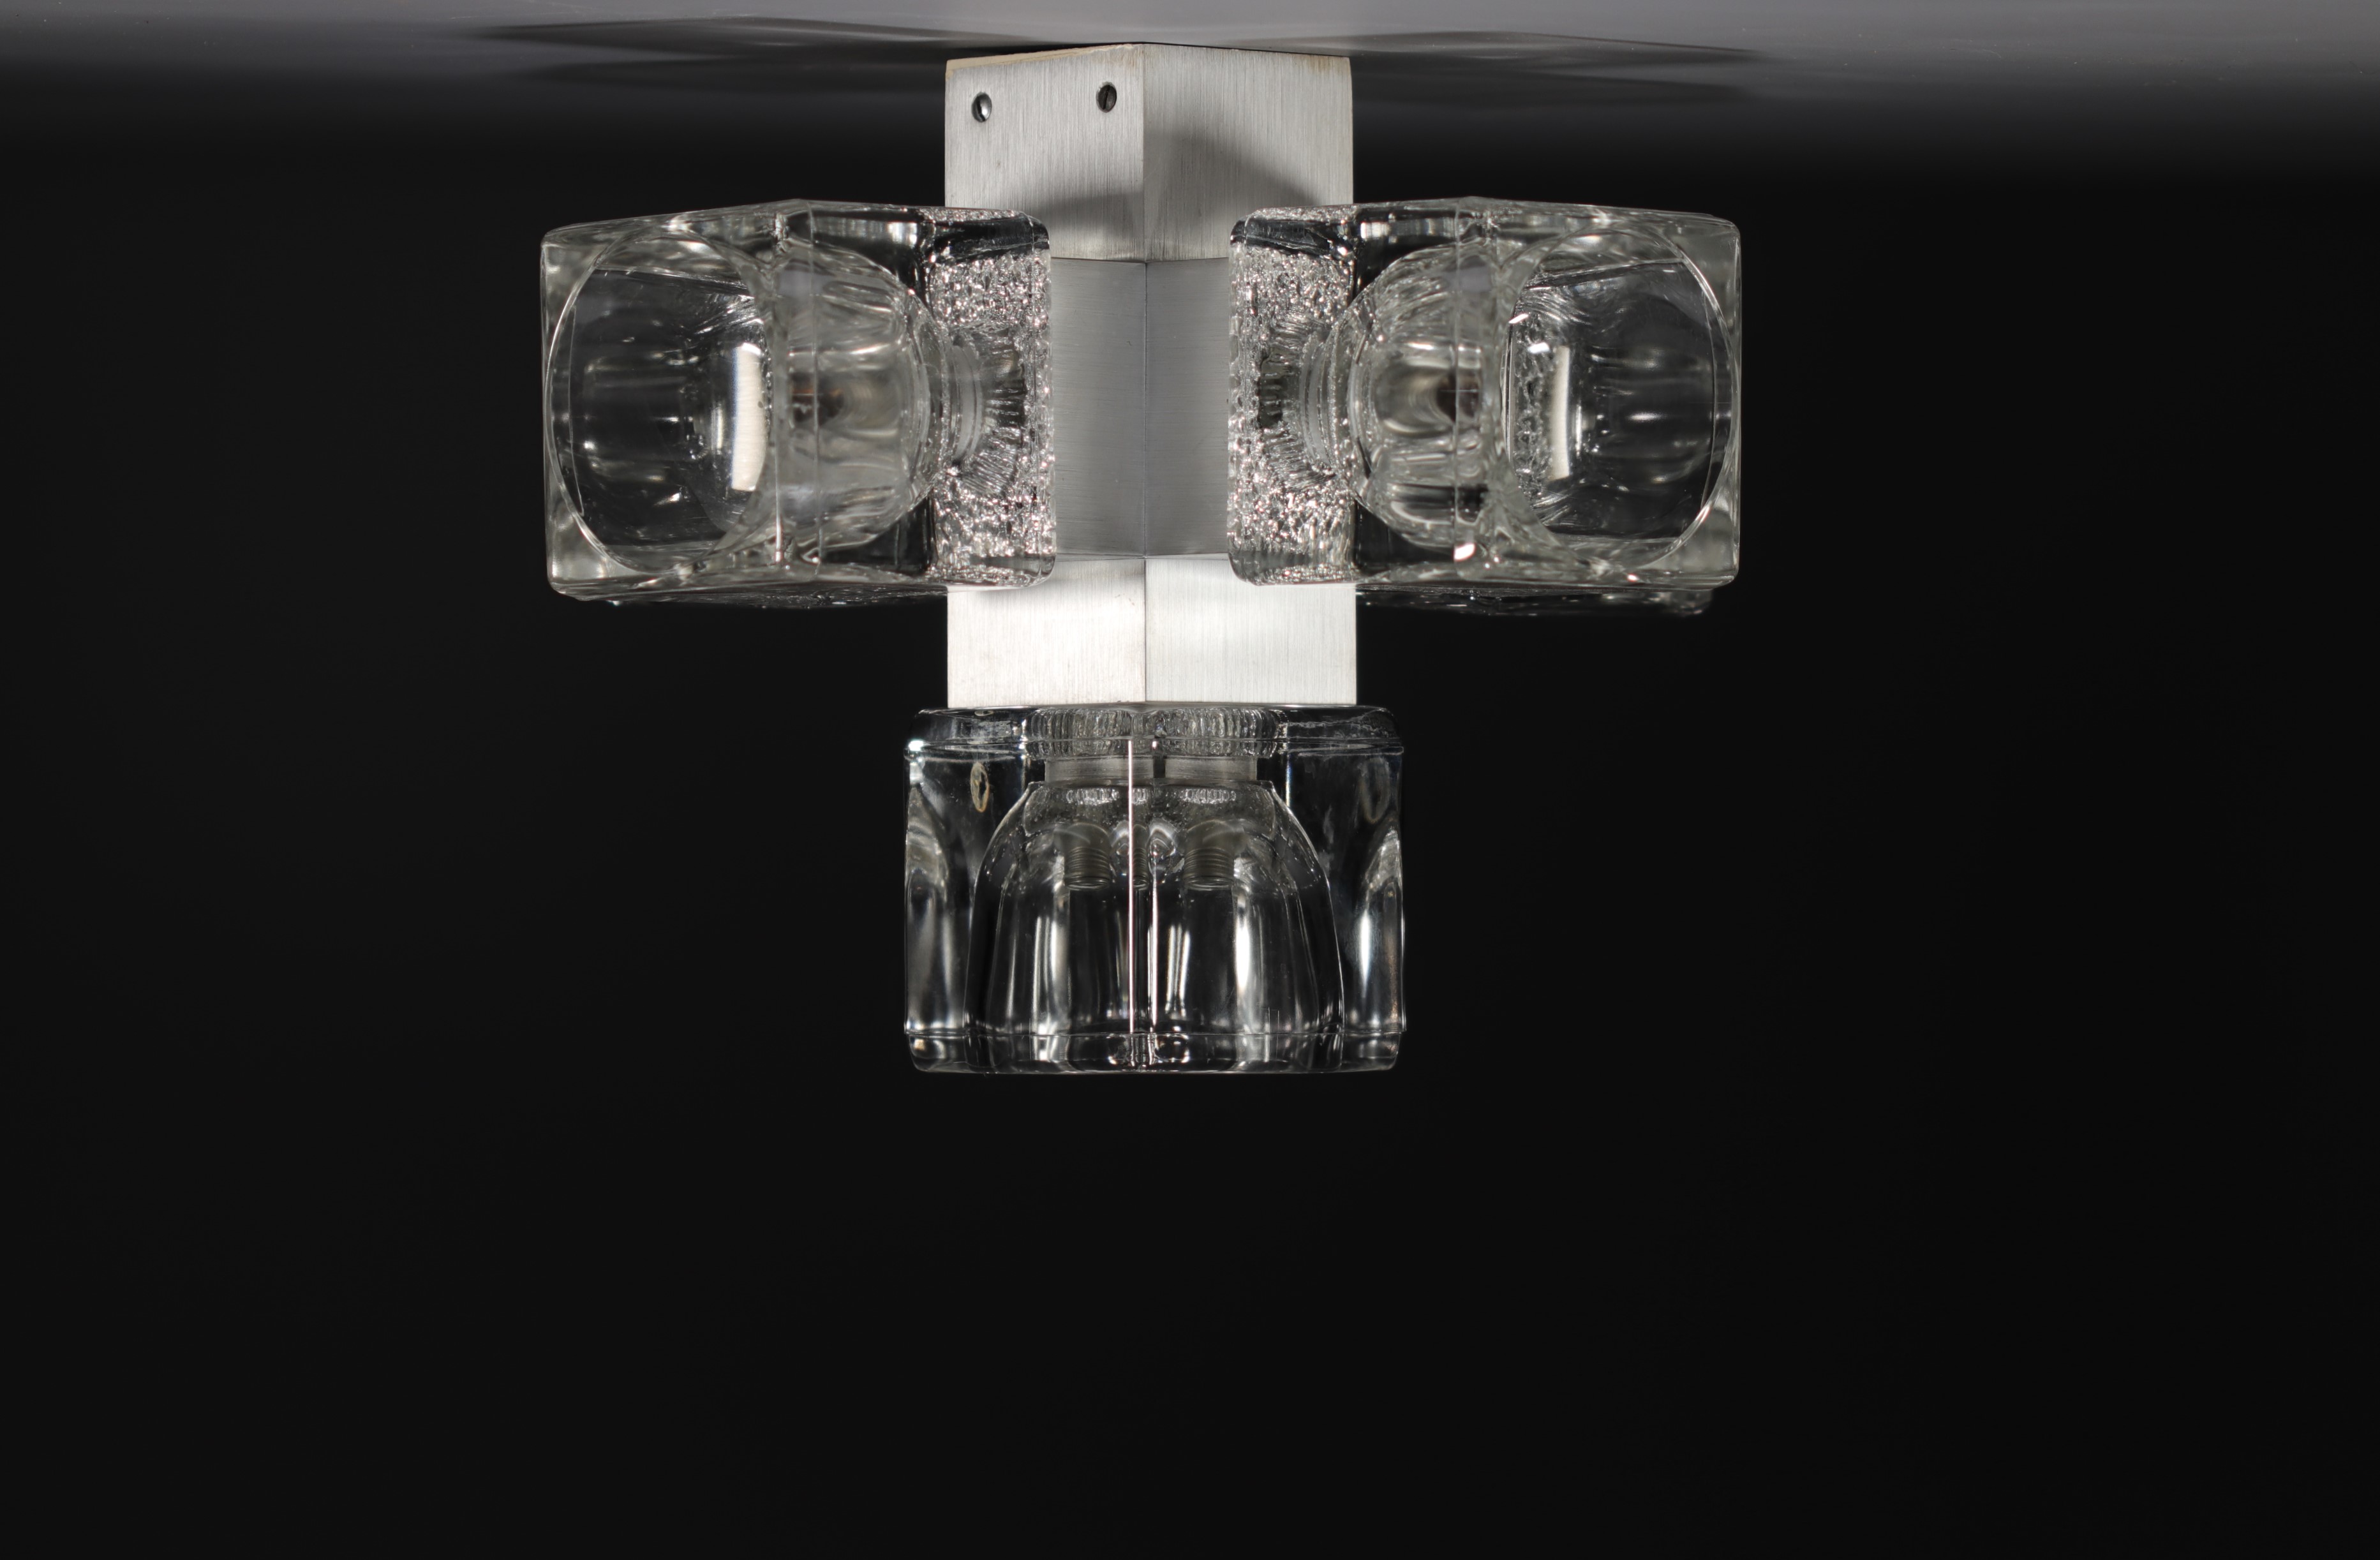 Peill & Putzler - Pair of "Cube" wall lights with five light points, circa 1960-70. - Image 2 of 3